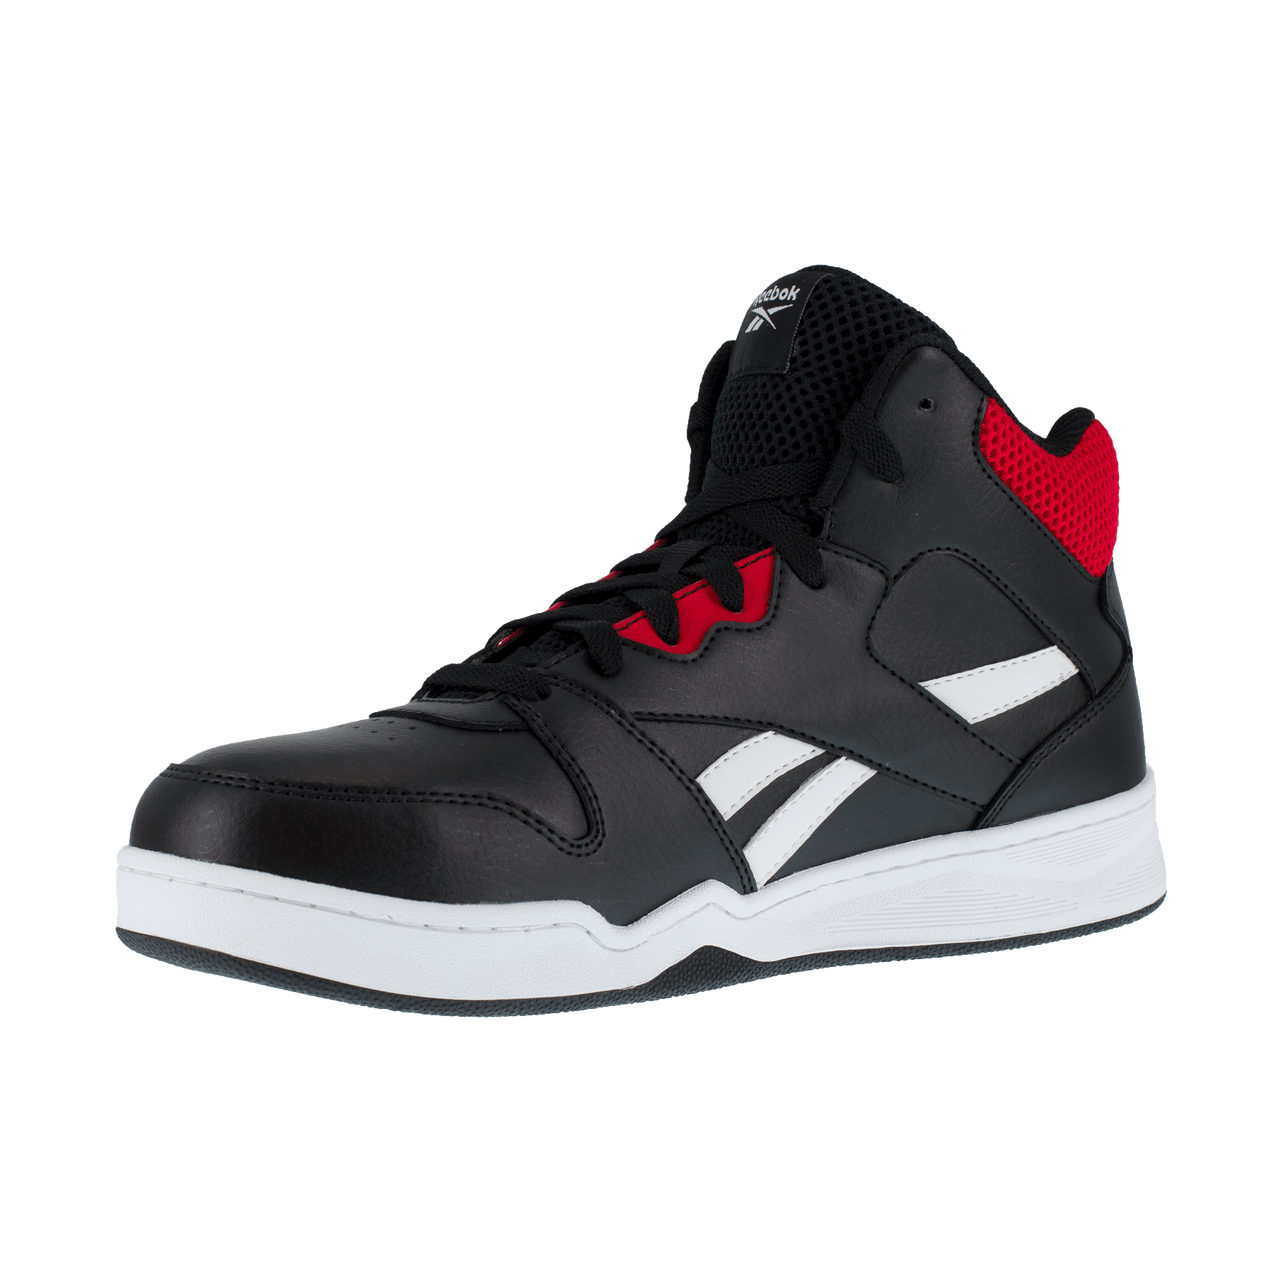 BB4500 High Top Work Sneaker product image